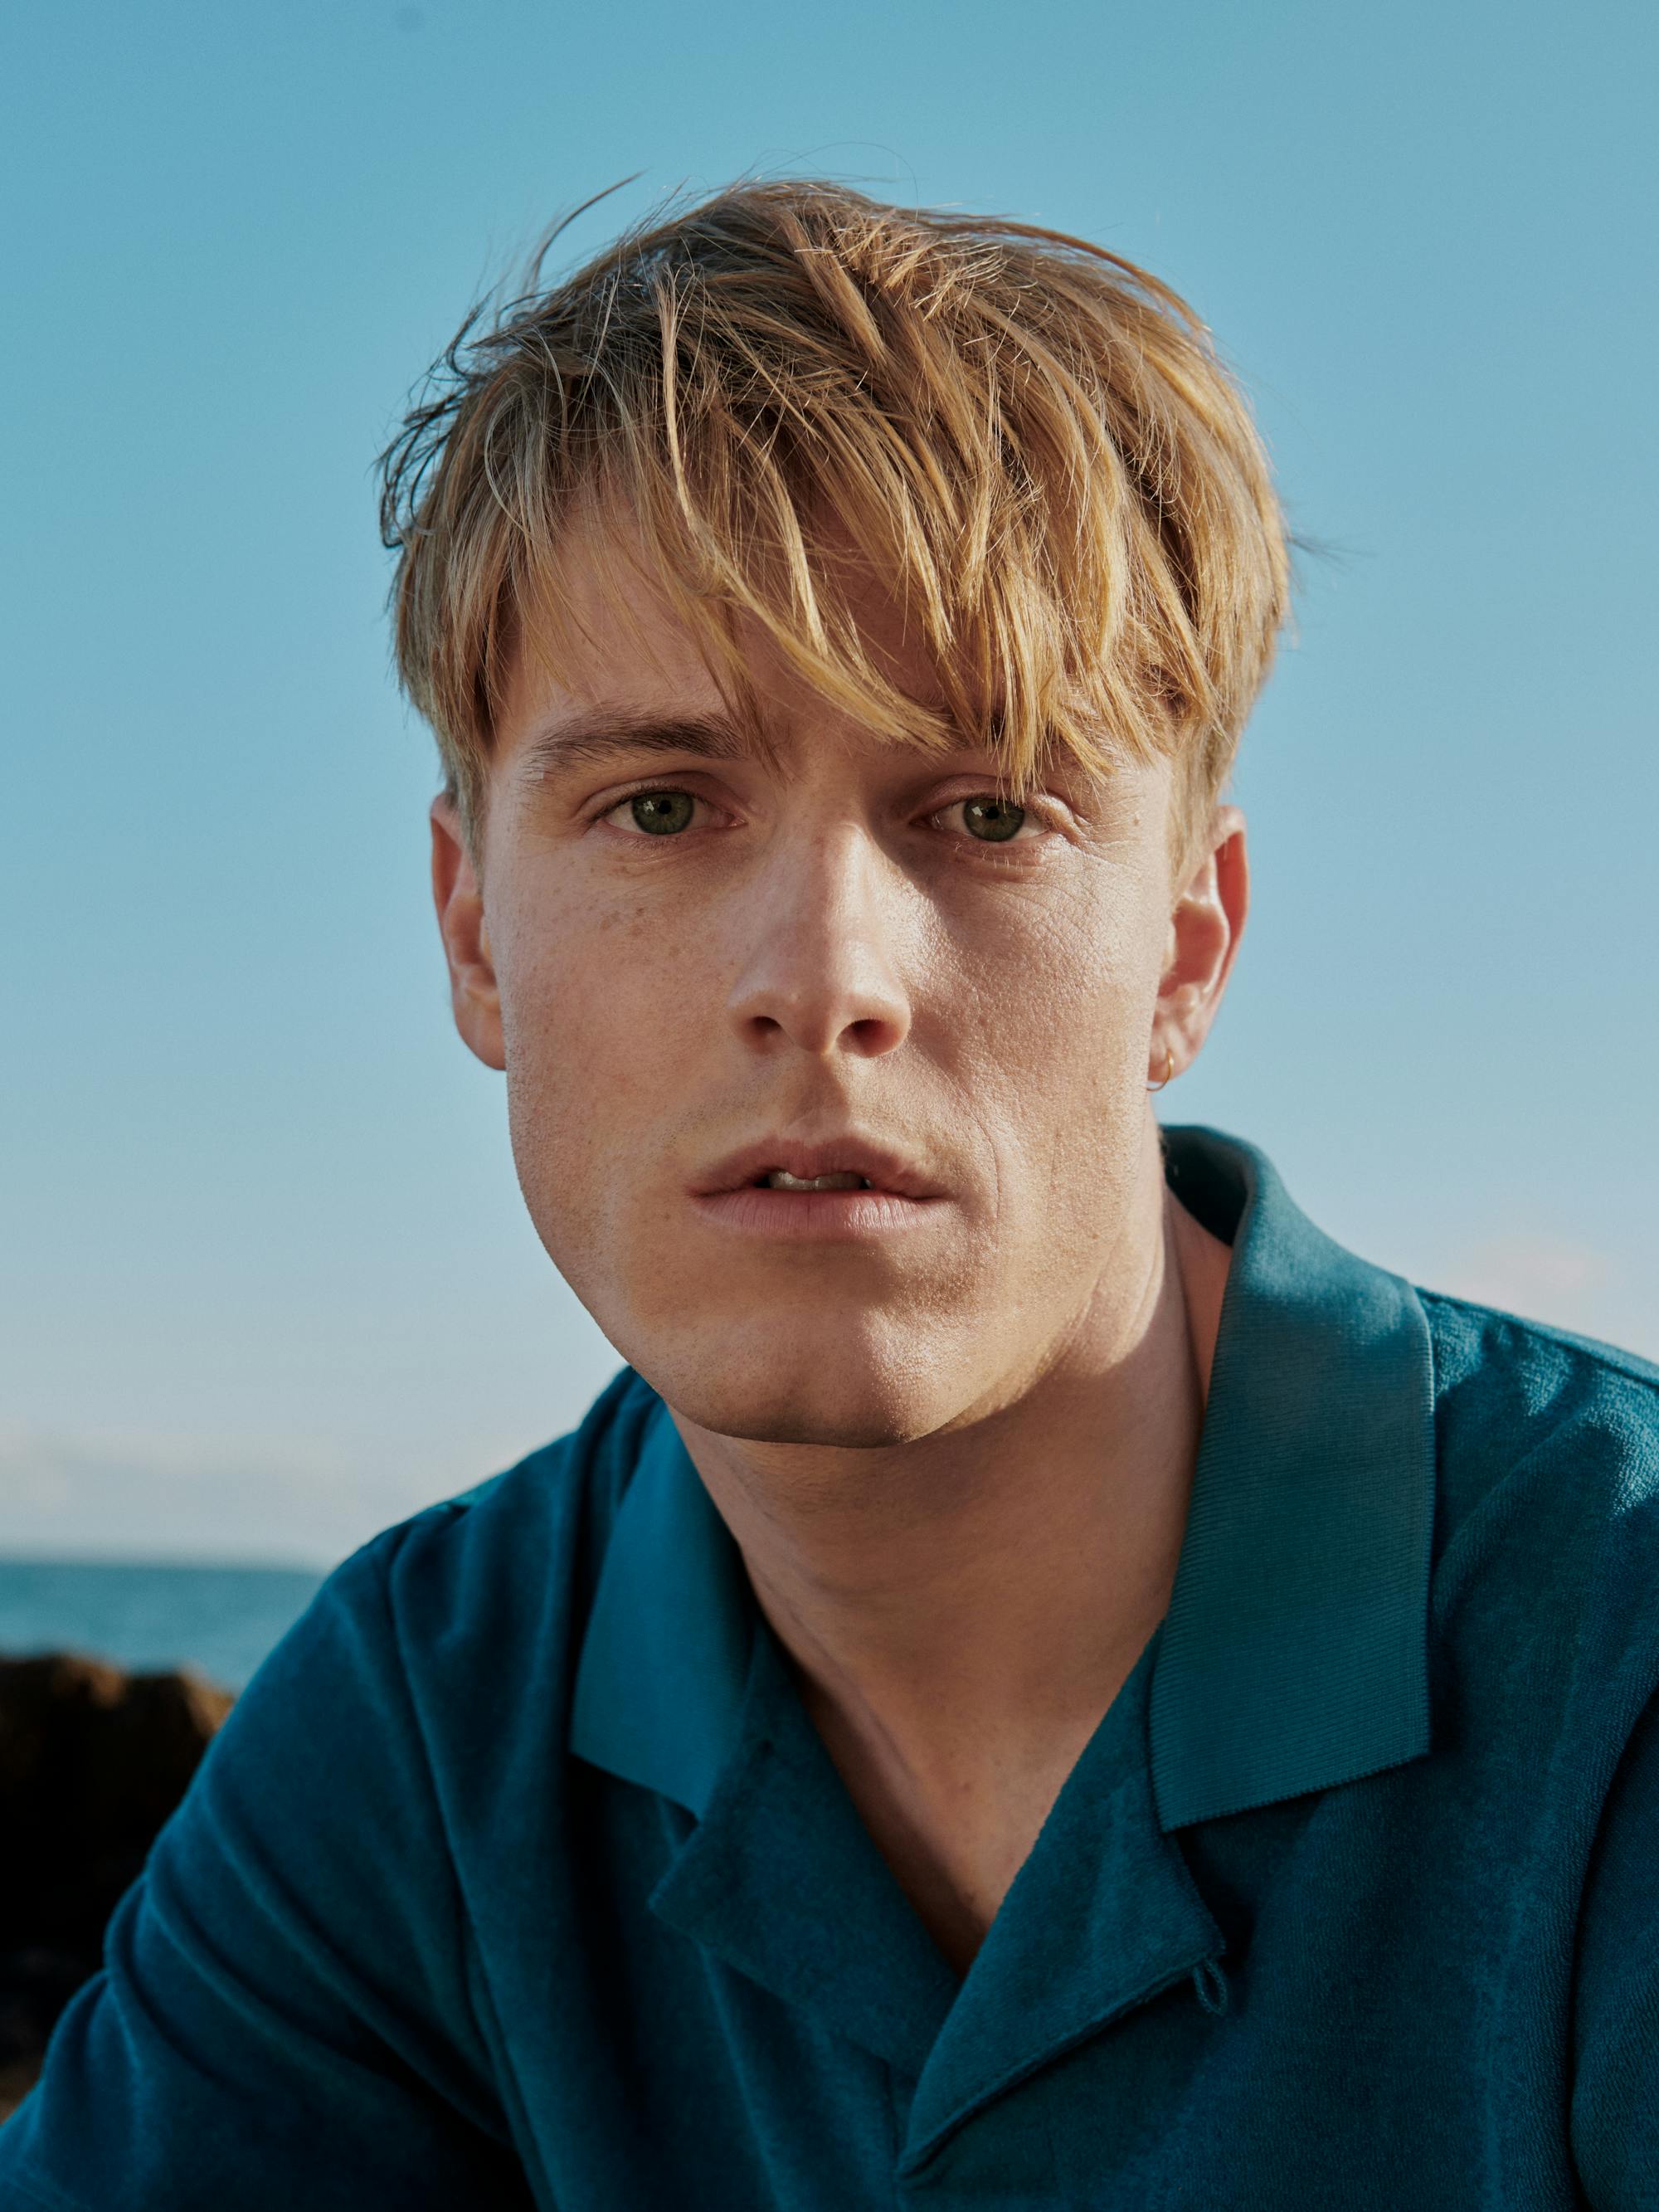 Movie Merchandise : All the Light We Cannot See Louis Hofmann